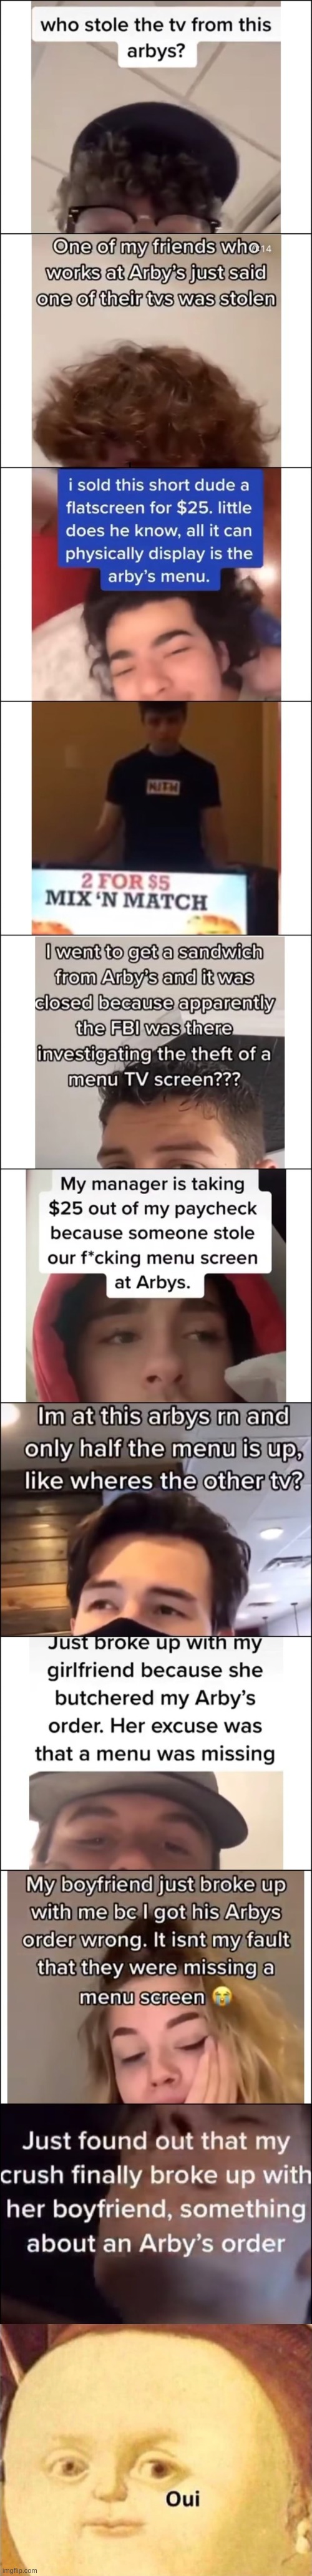 *arby's intensifies* | image tagged in oui | made w/ Imgflip meme maker